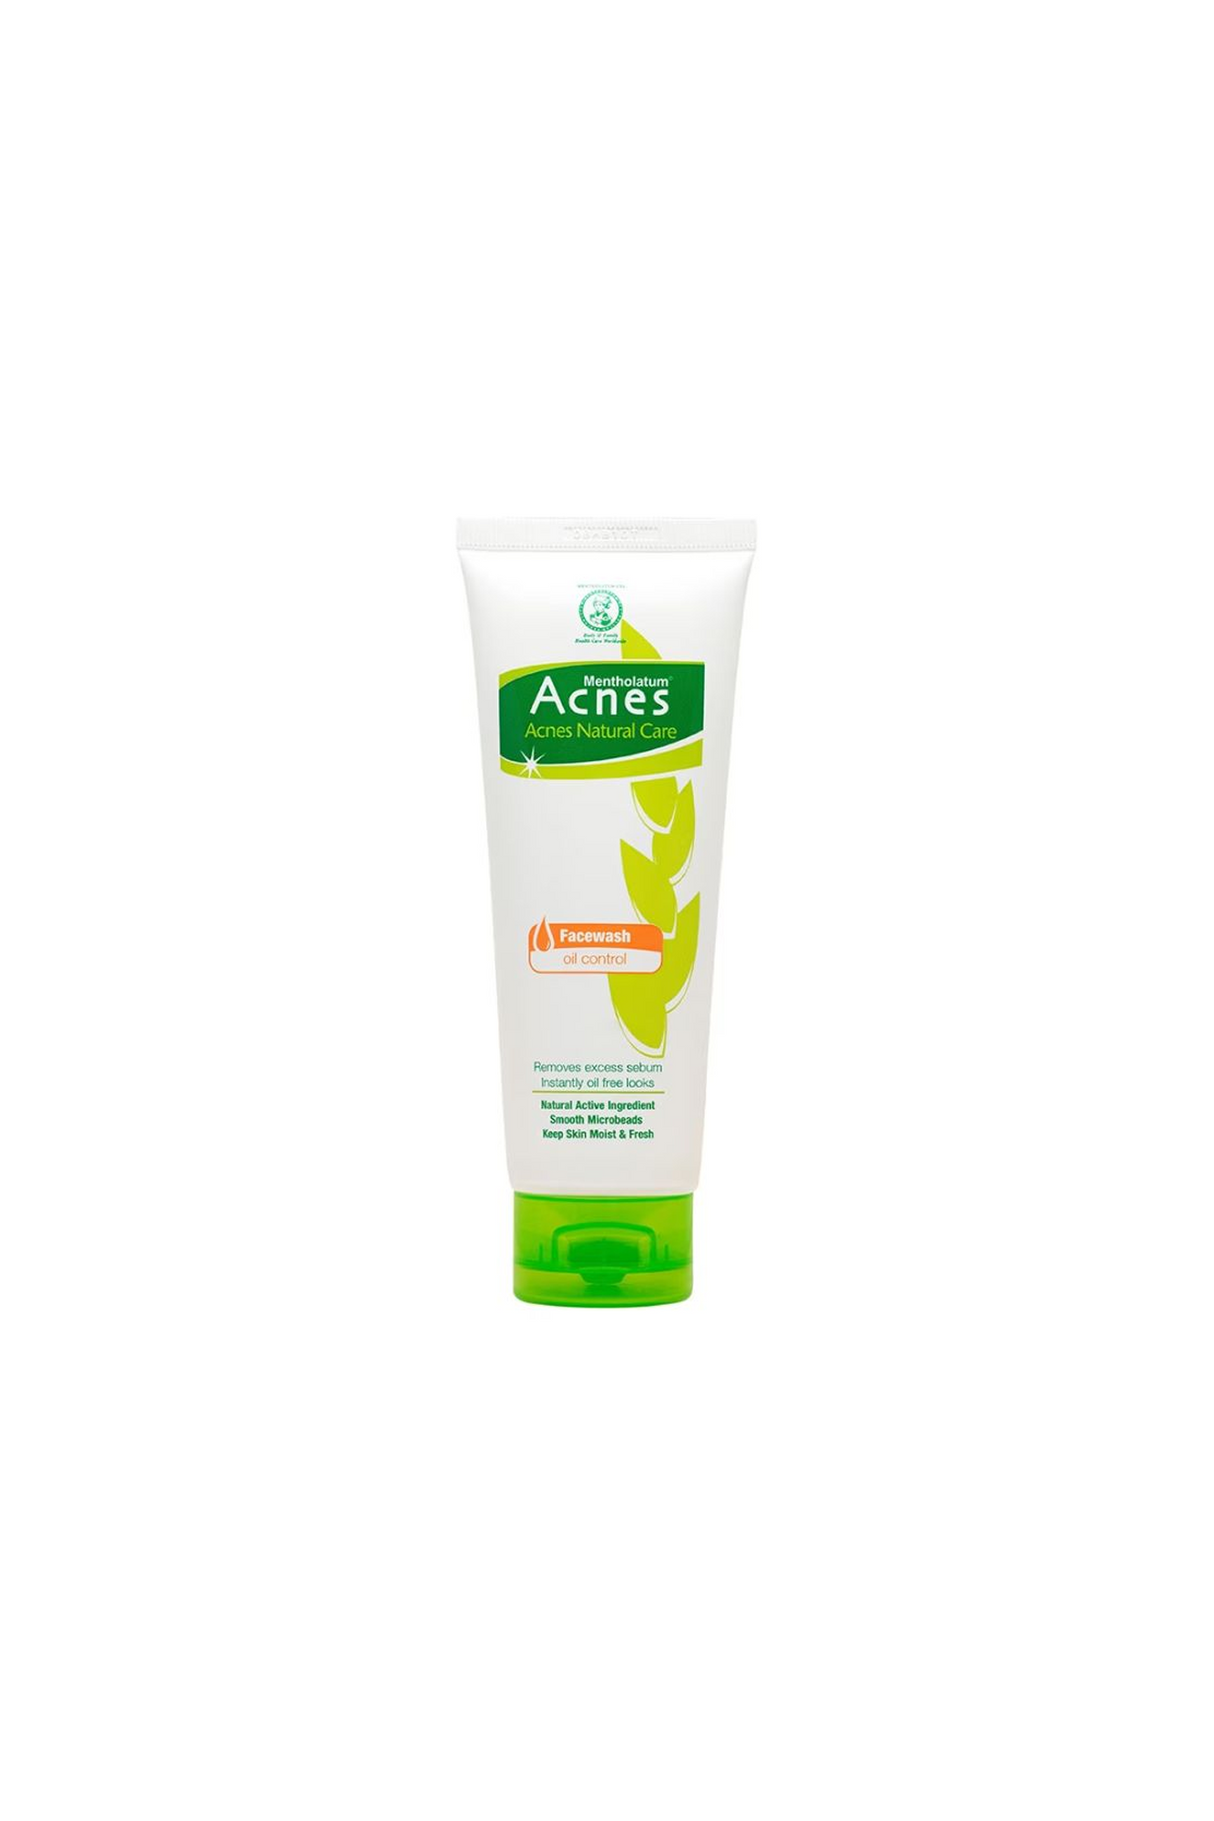 acnes face wash oil control 100g